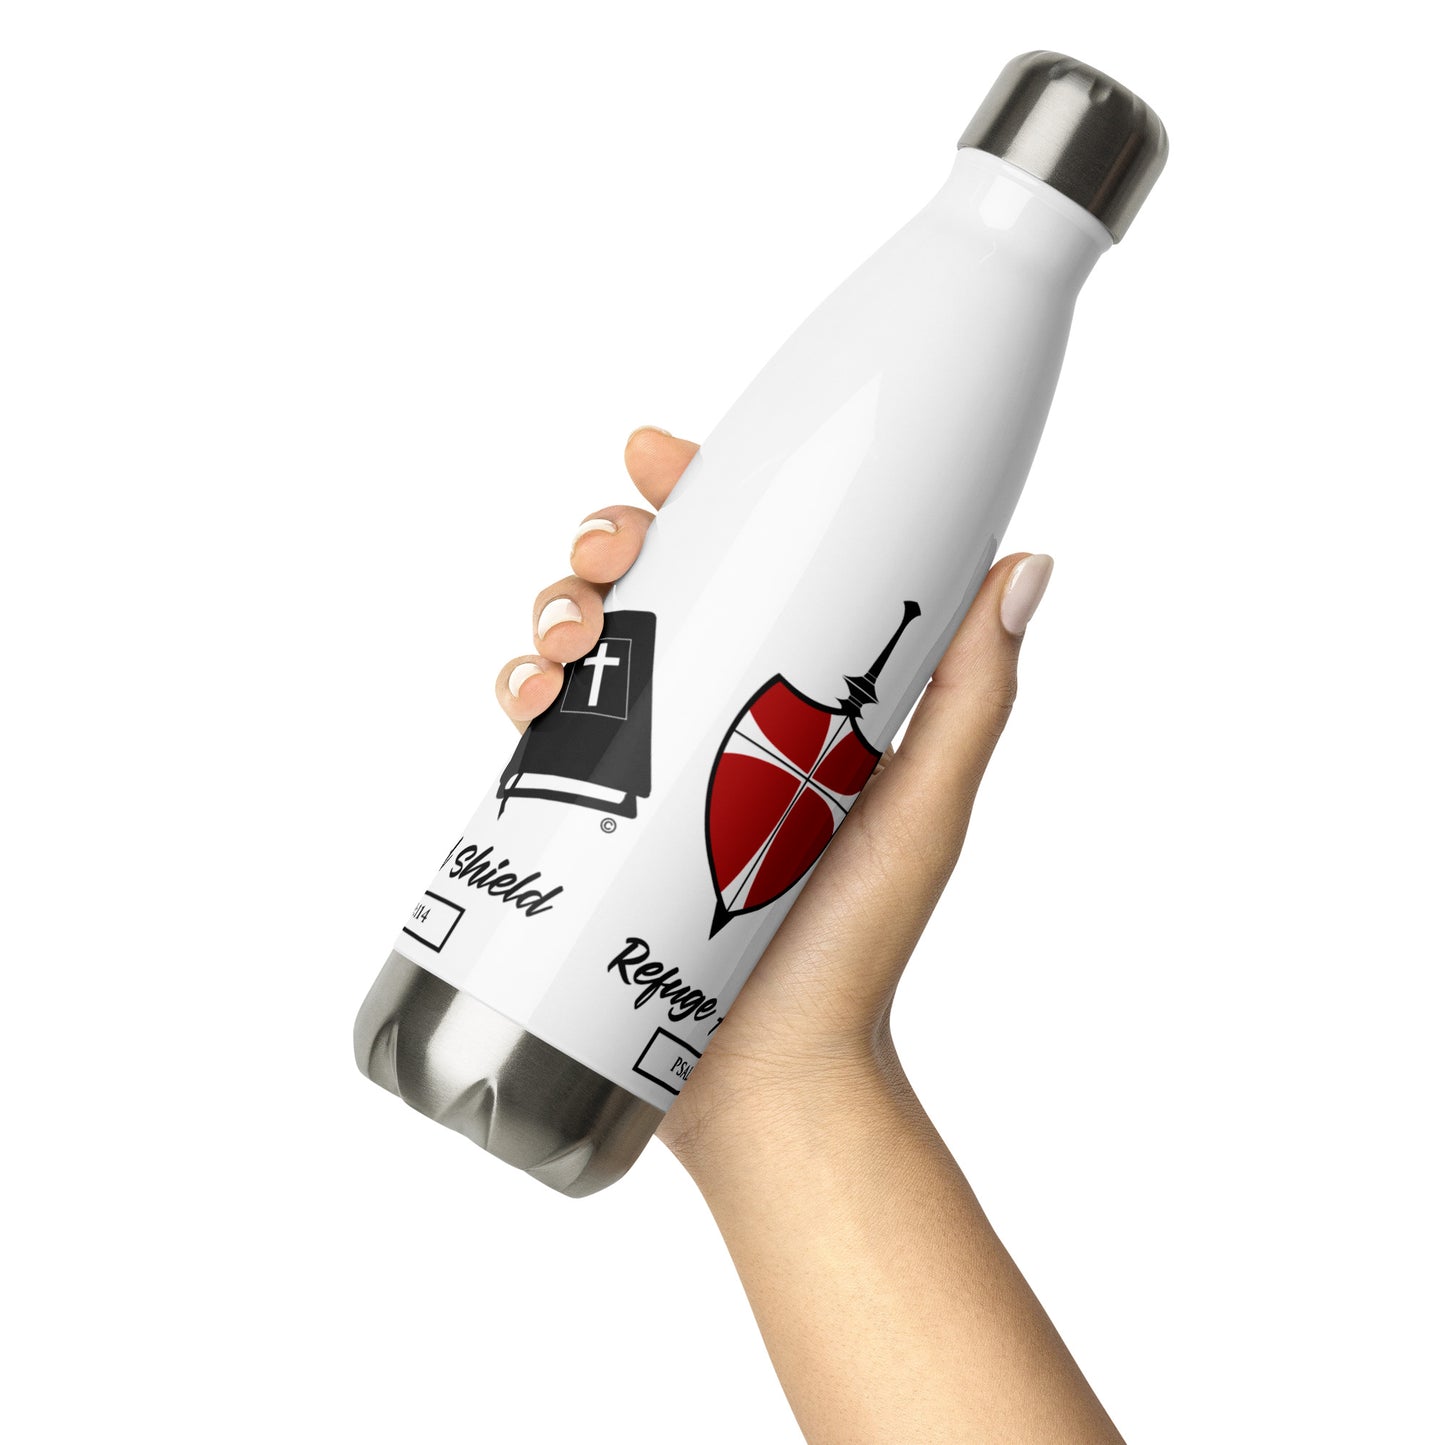 Refuge and Shield Stainless Steel Water Bottle